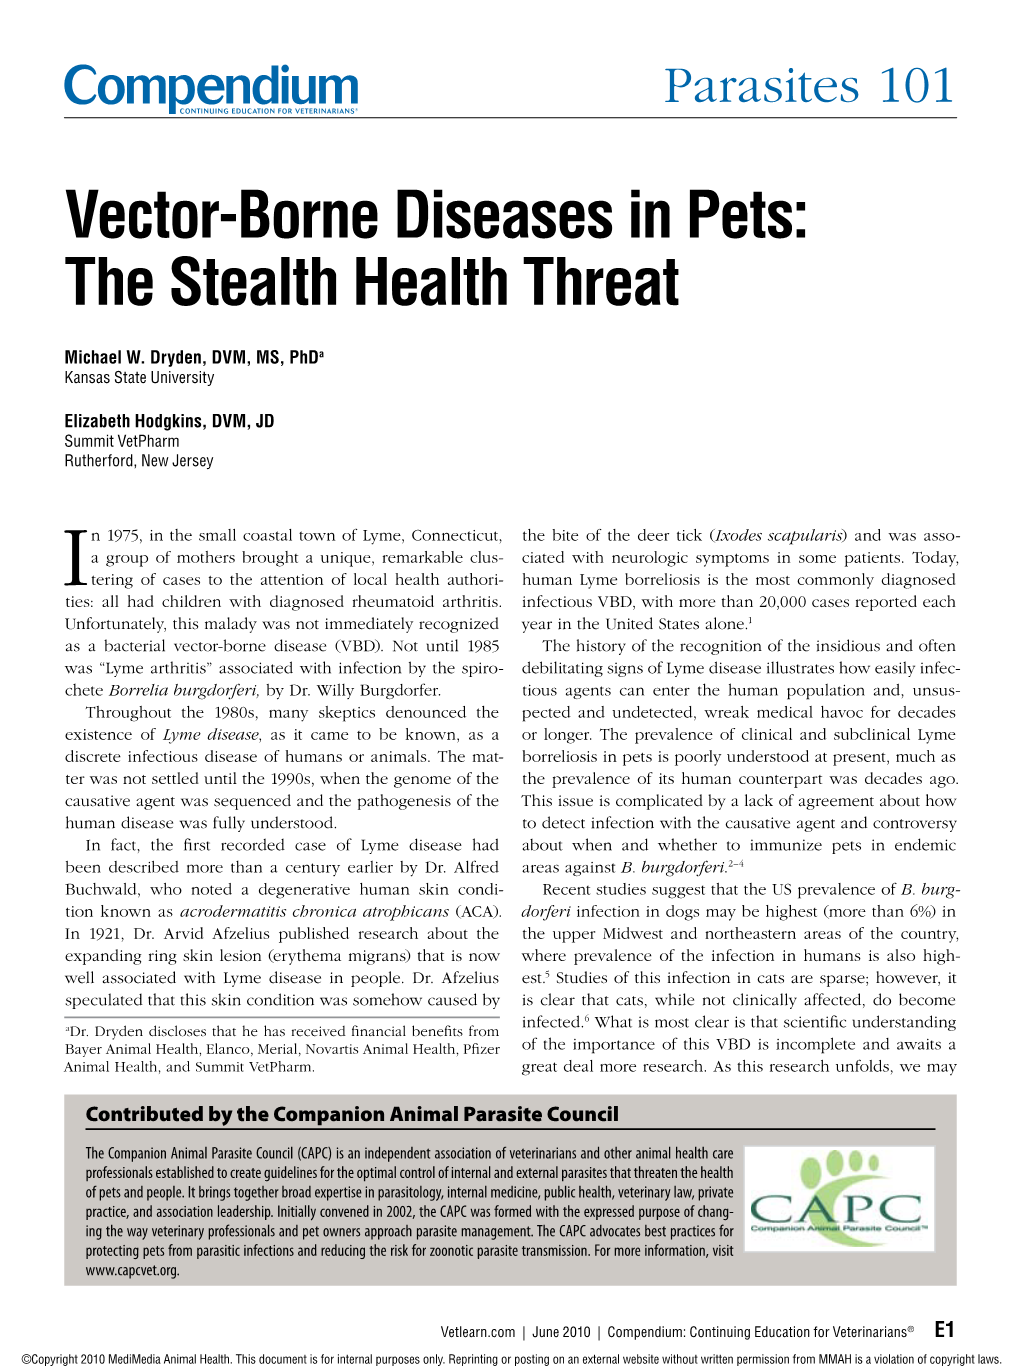 Vector-Borne Diseases in Pets: the Stealth Health Threat